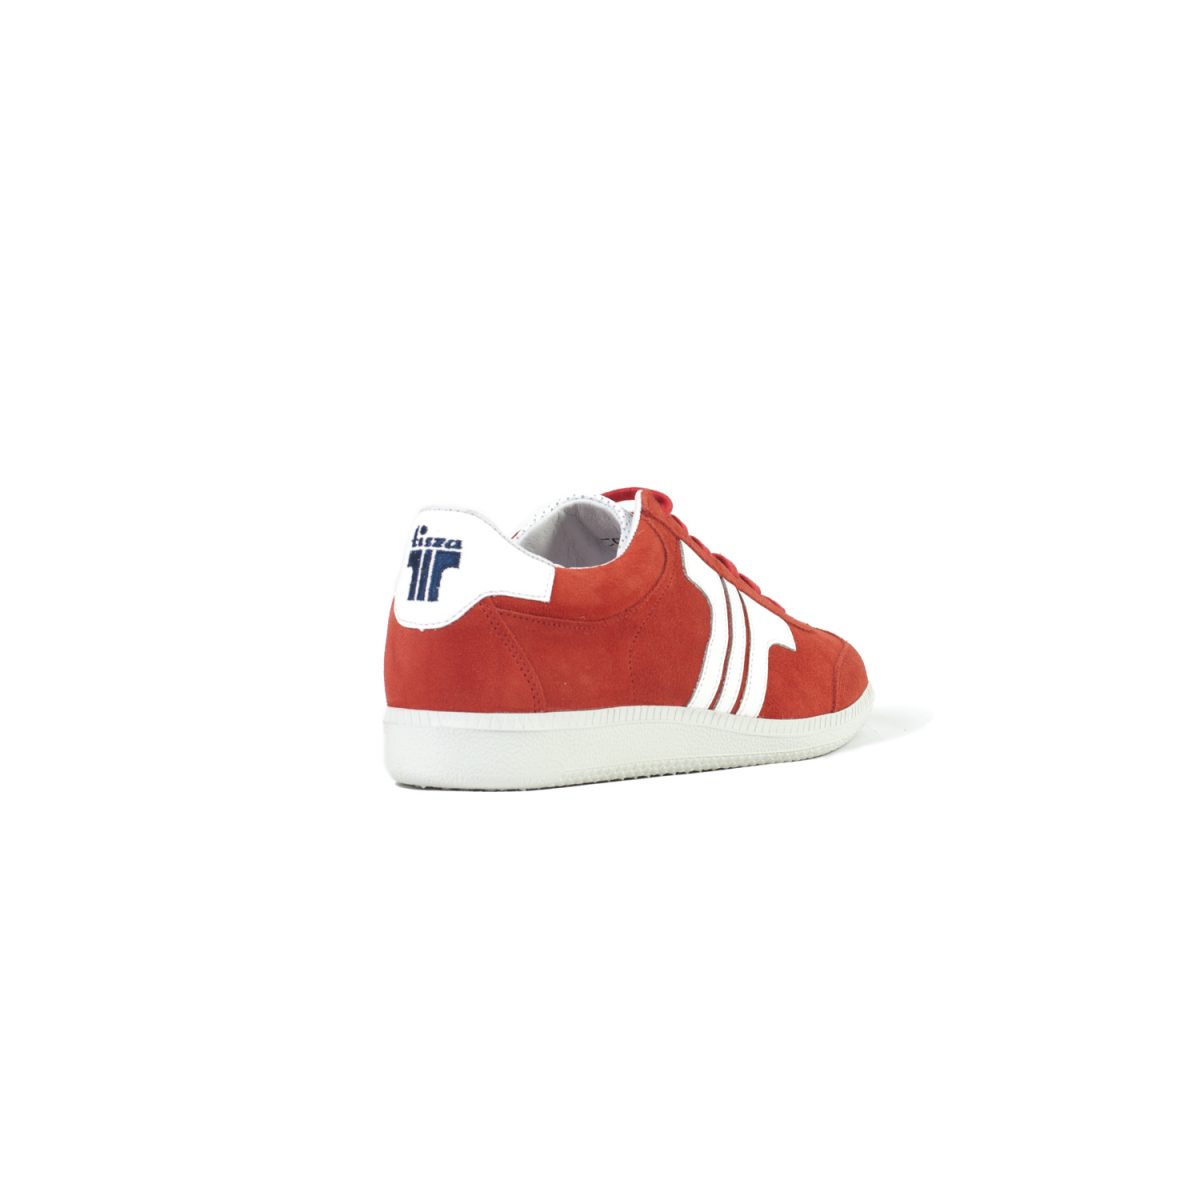 Tisza shoes - Comfort - Red zone